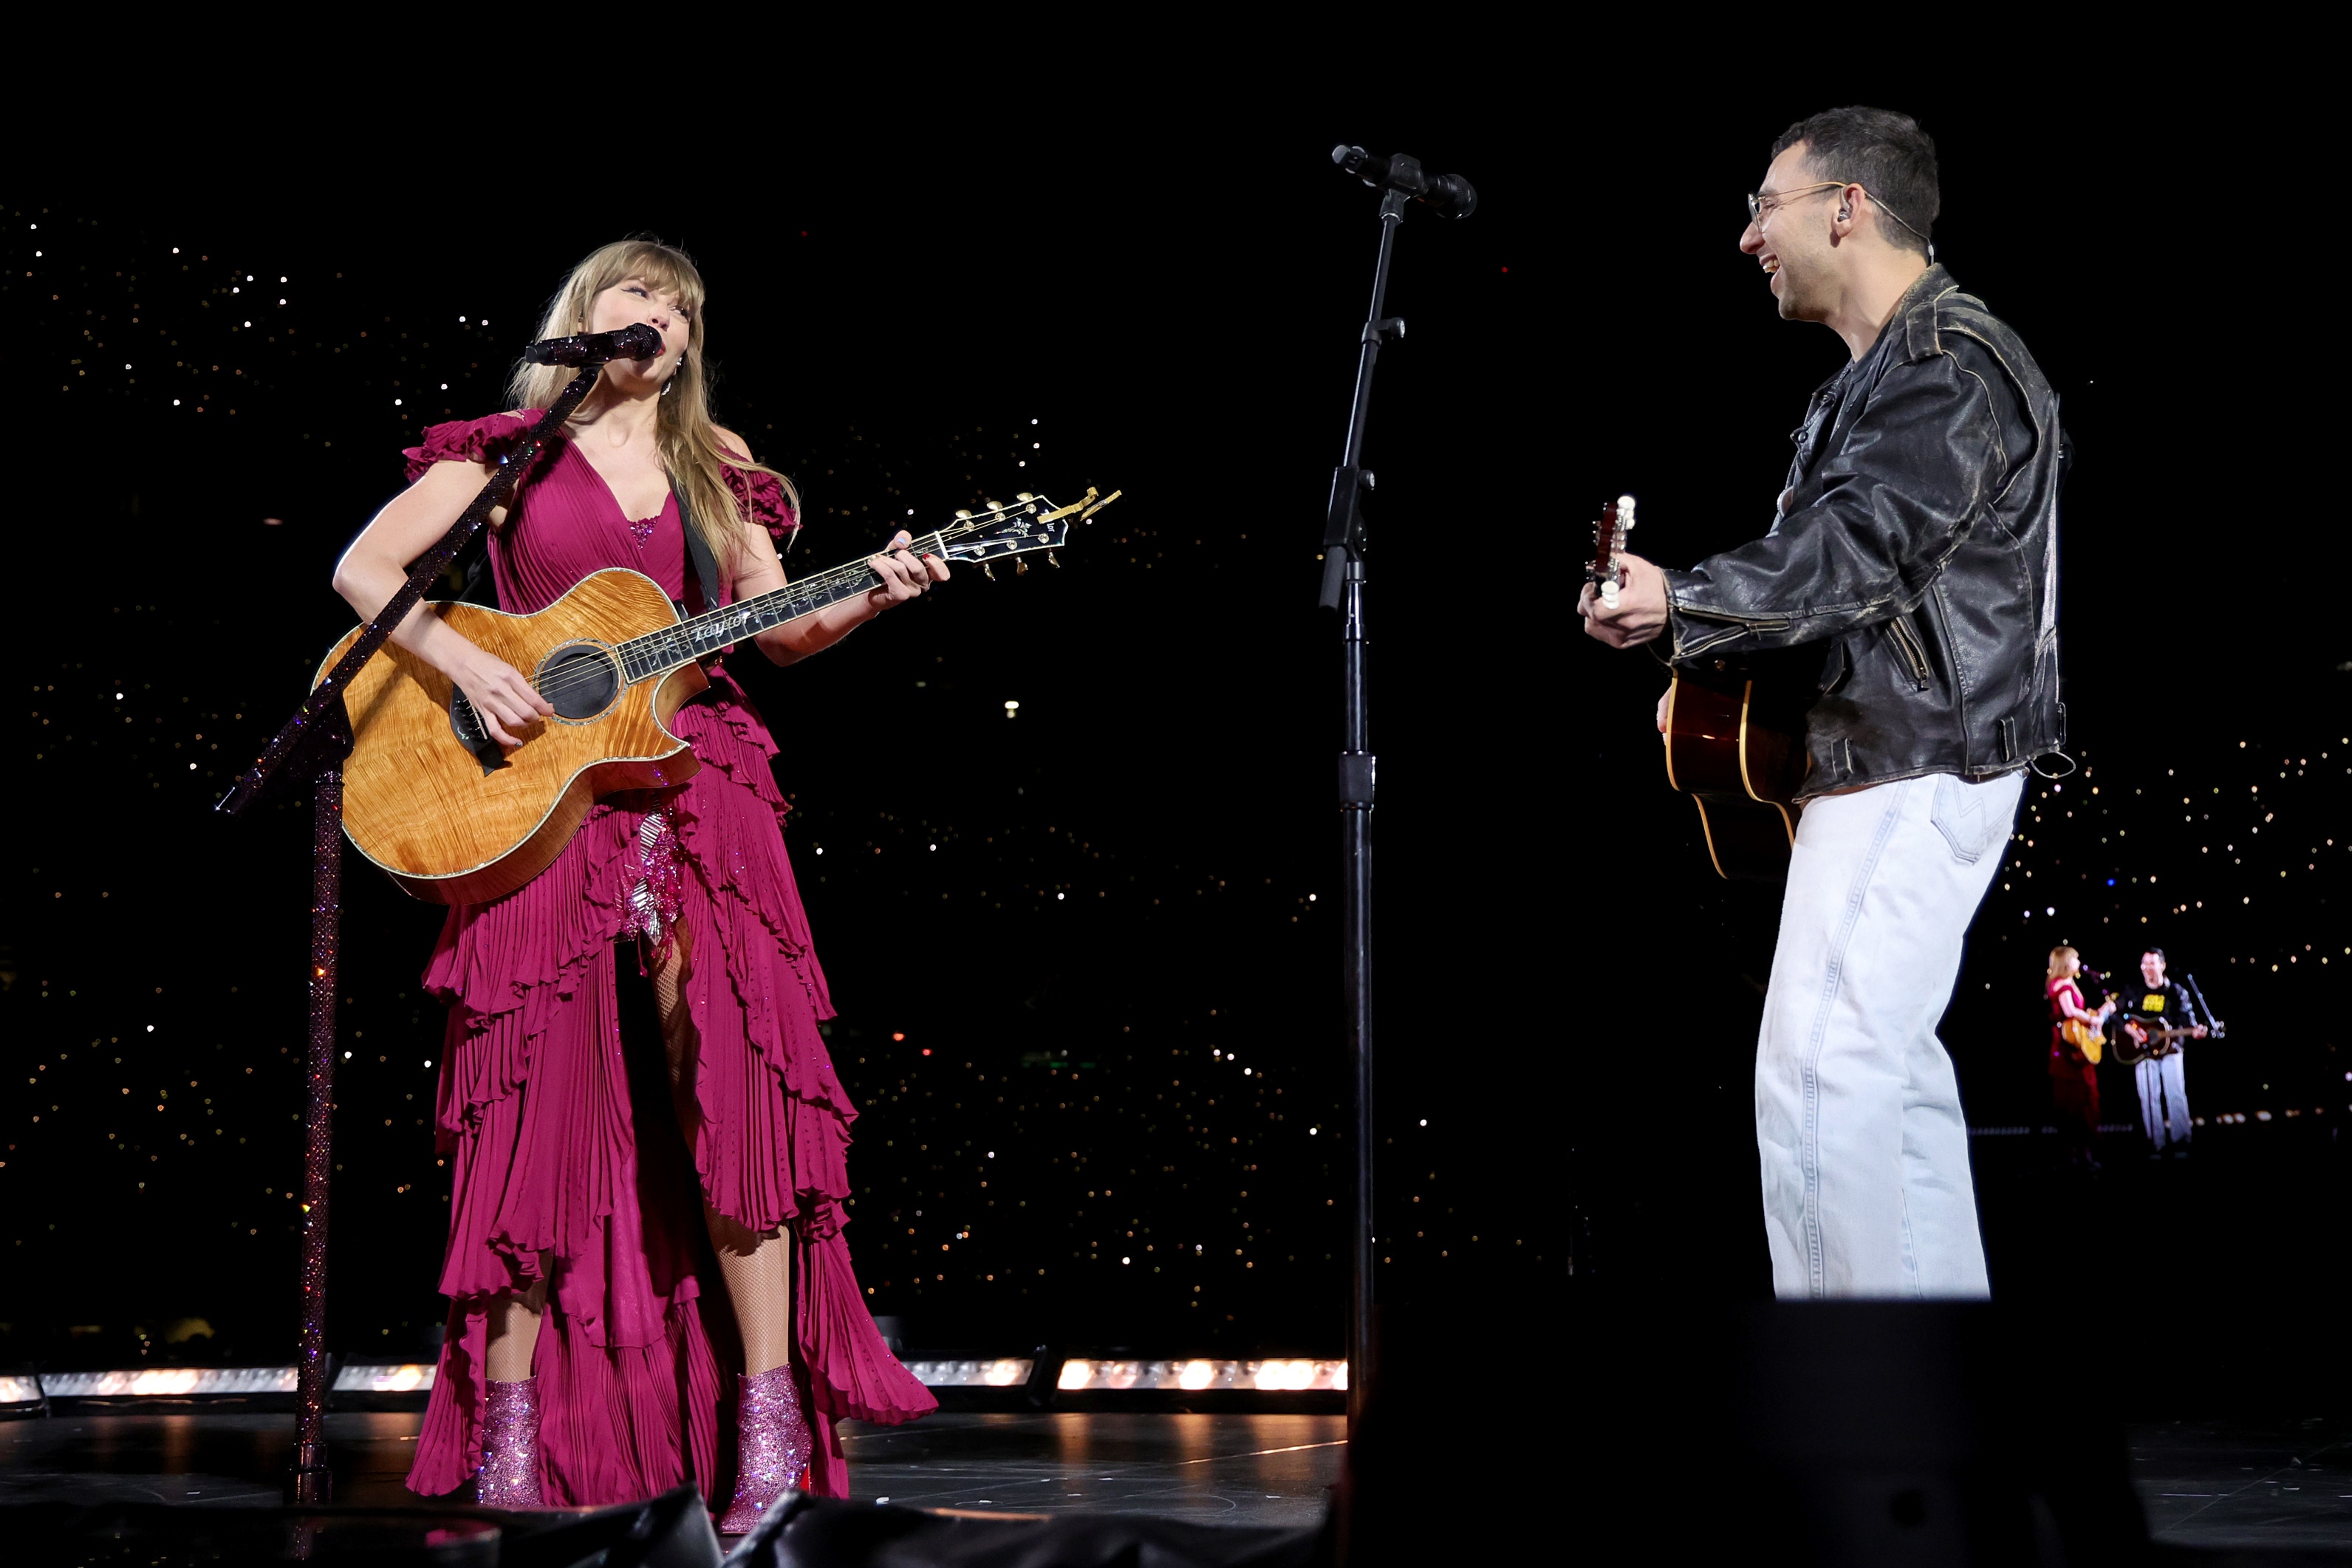 Taylor and Jack onstage